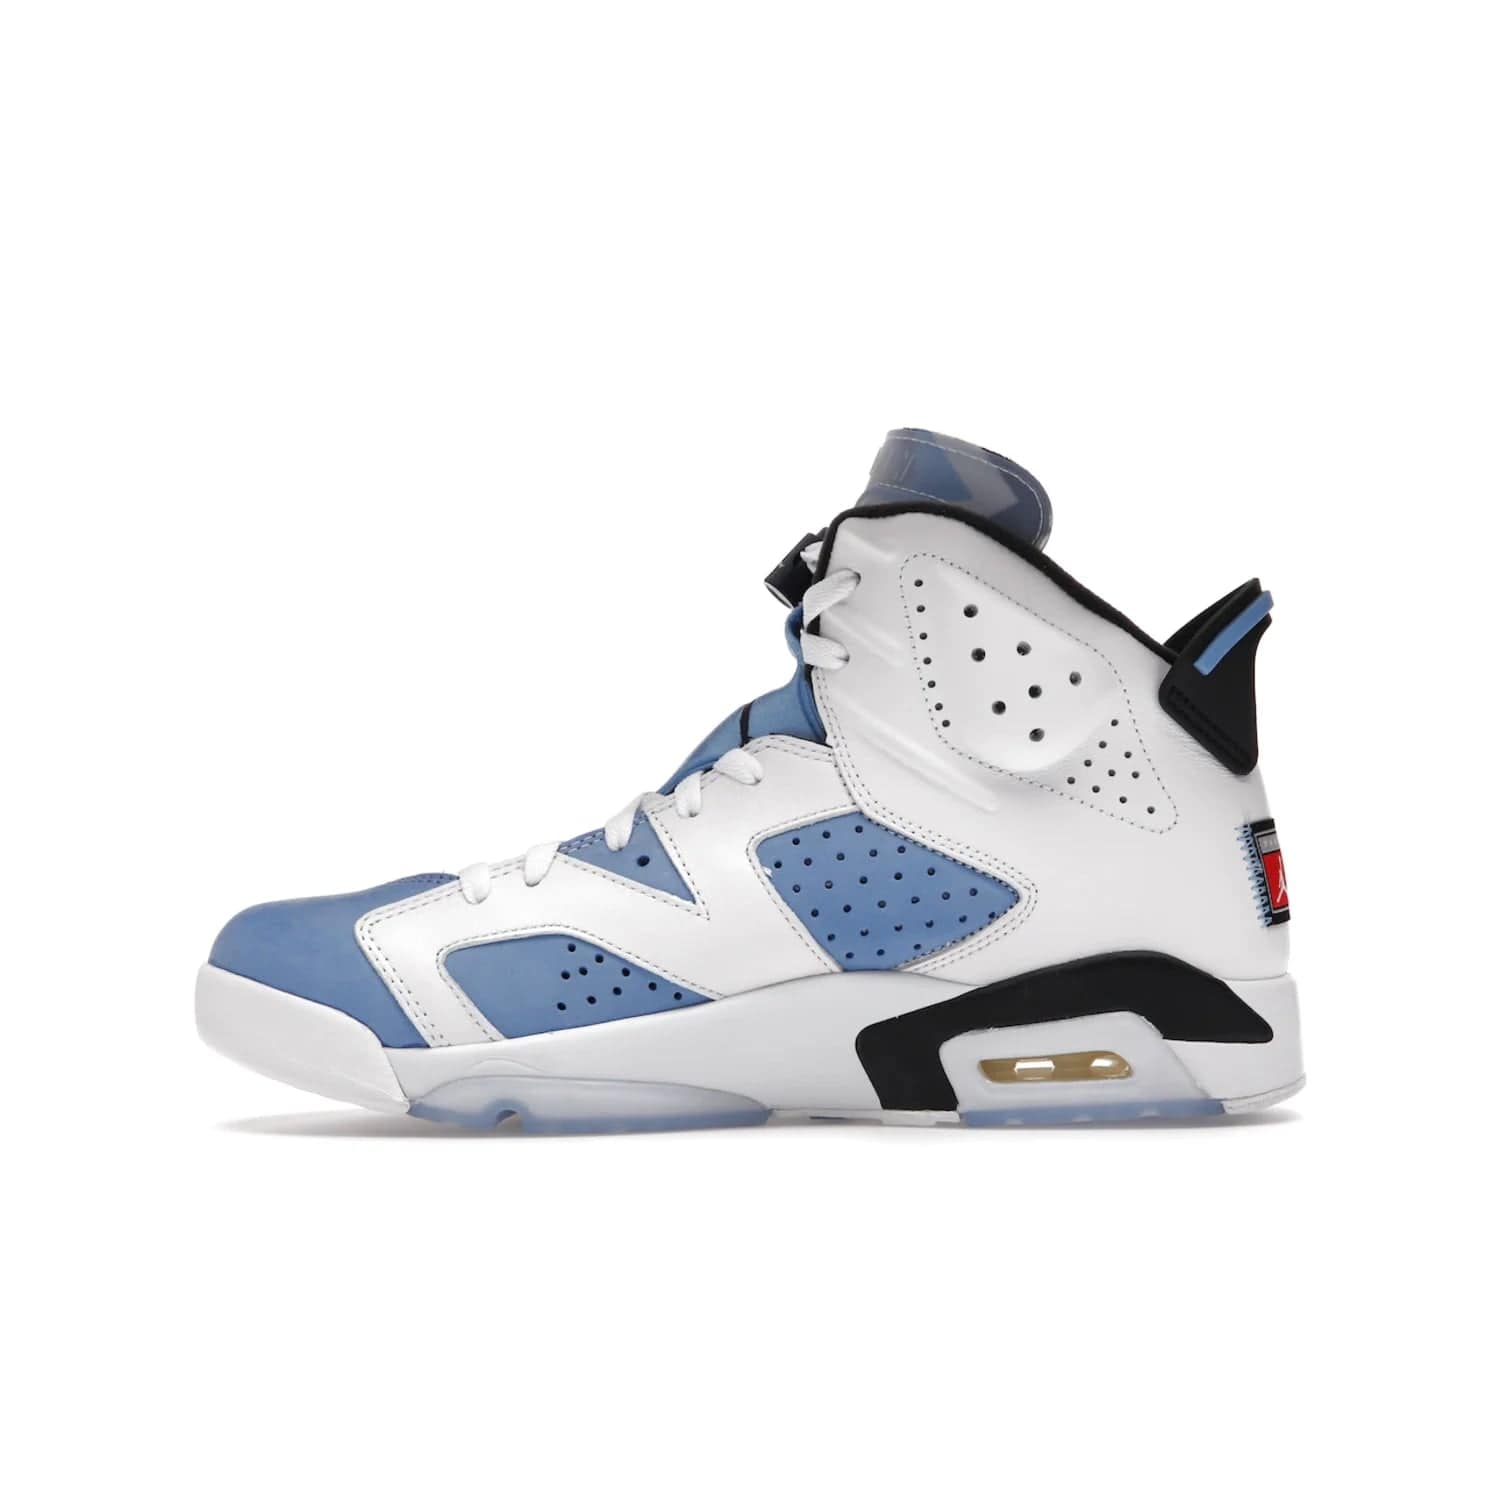 Jordan 6 Retro UNC White - Image 19 - Only at www.BallersClubKickz.com - Air Jordan 6 Retro UNC White with classic UNC colors brings nostalgia and style to a legendary silhouette. Celebrate MJ's alma mater with navy blue accents, icy semi-translucent sole and Jordan Team patch. Out March 2022 for the Sneaker Enthusiast.